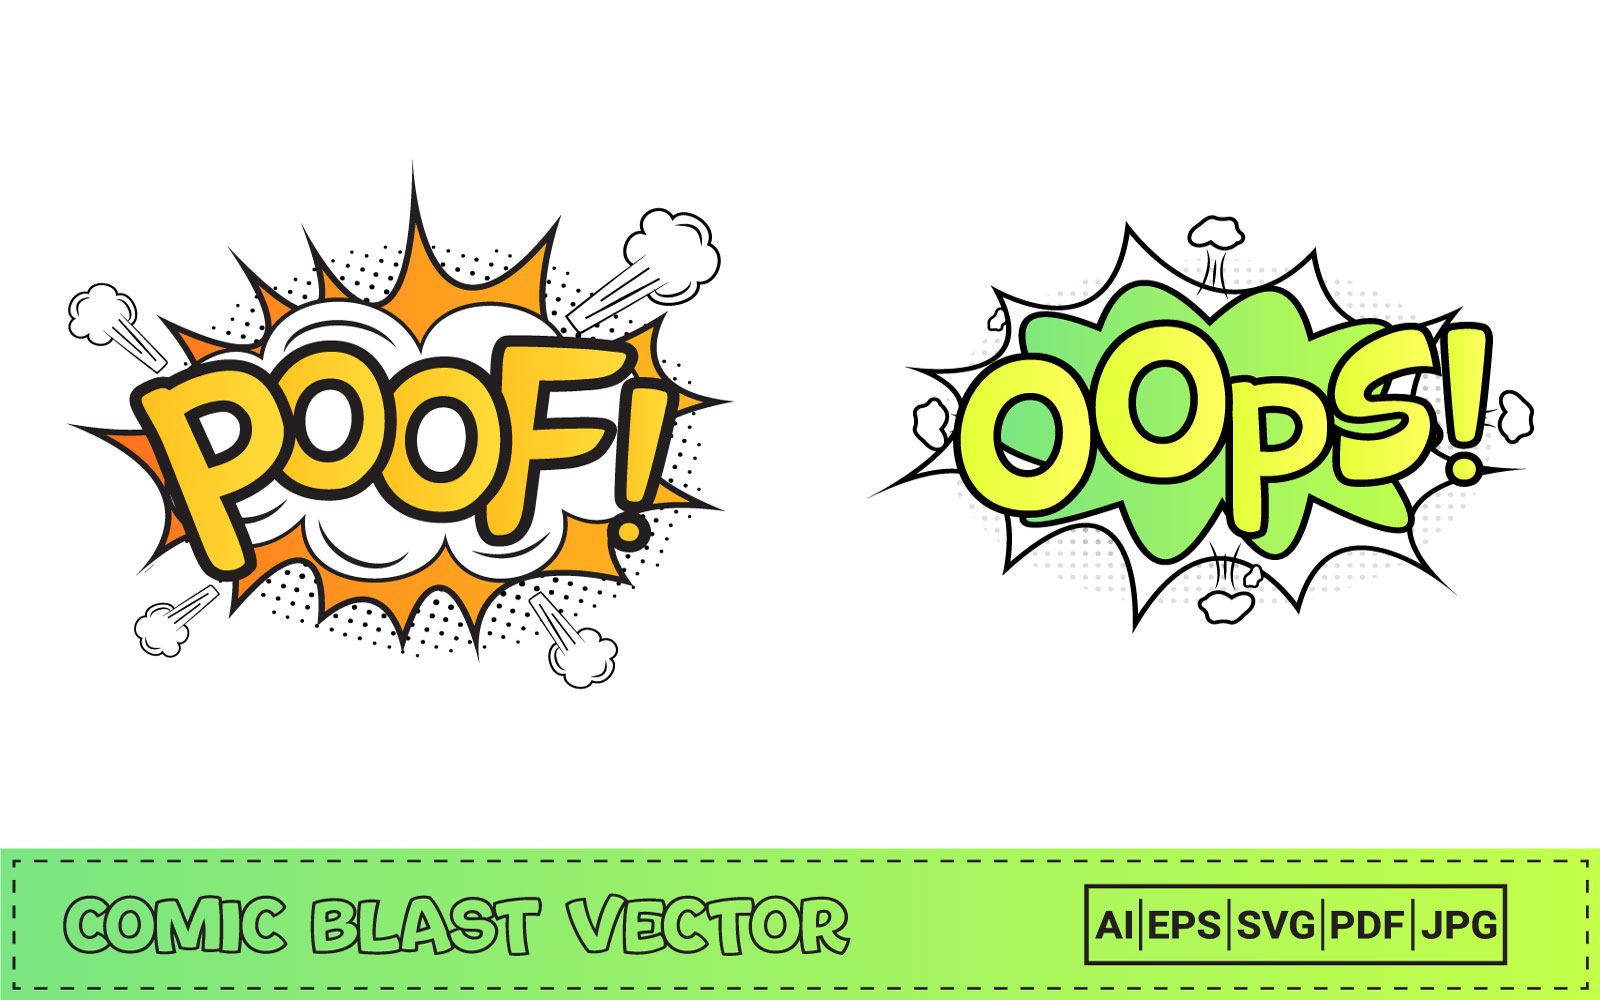 Comic Blast Vector with Poof and Oops